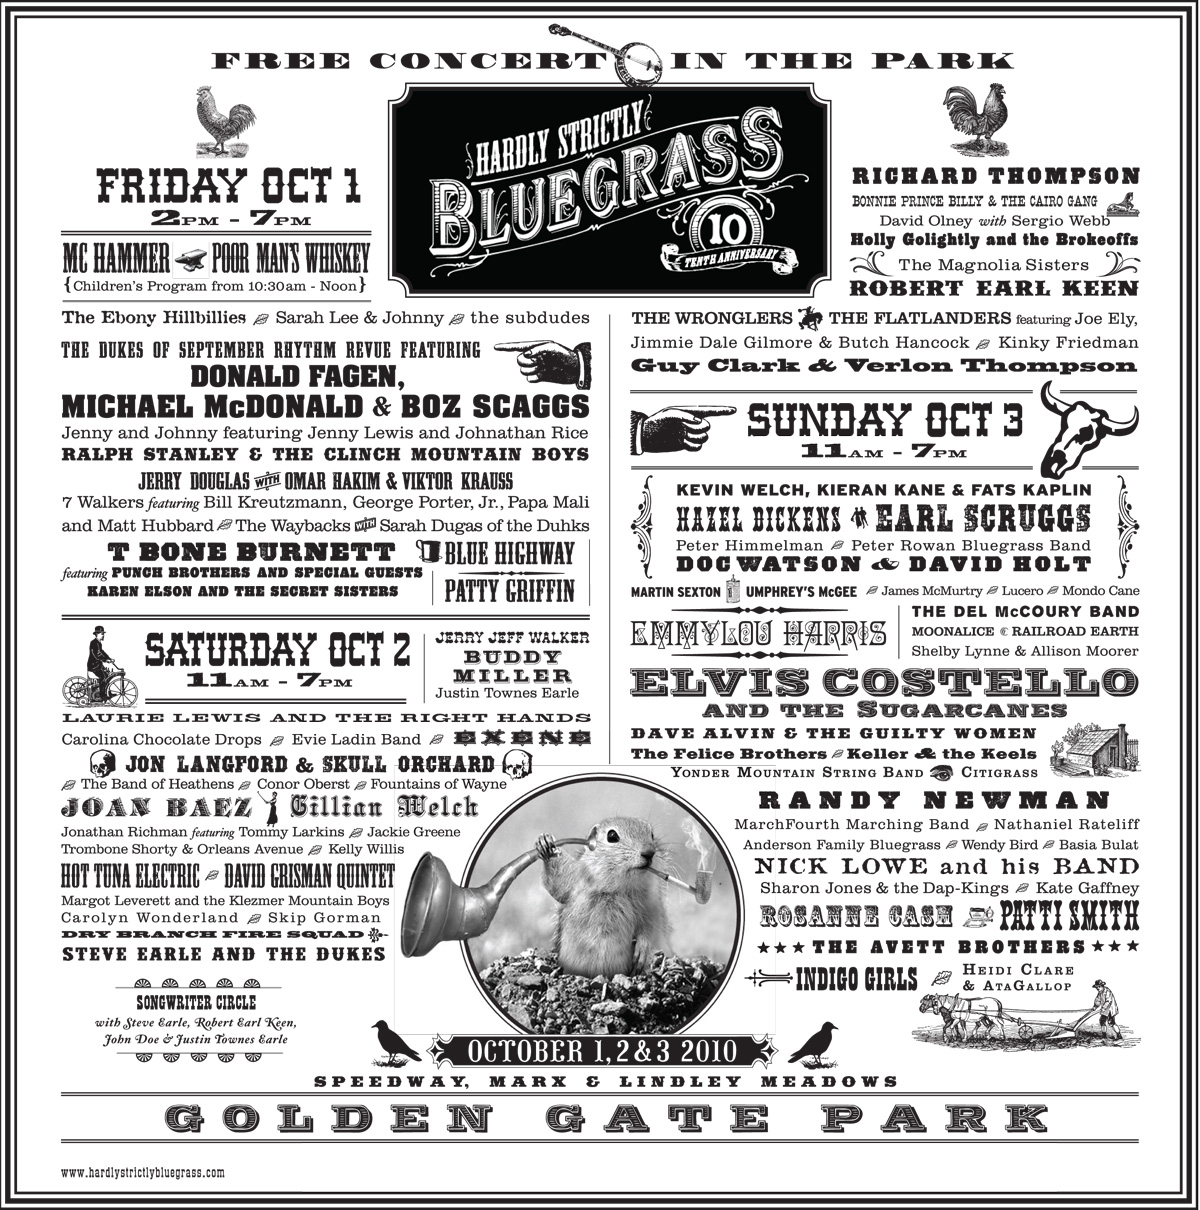 Gopher Image in Use - Hardly Strictly Bluegrass Festival Poster